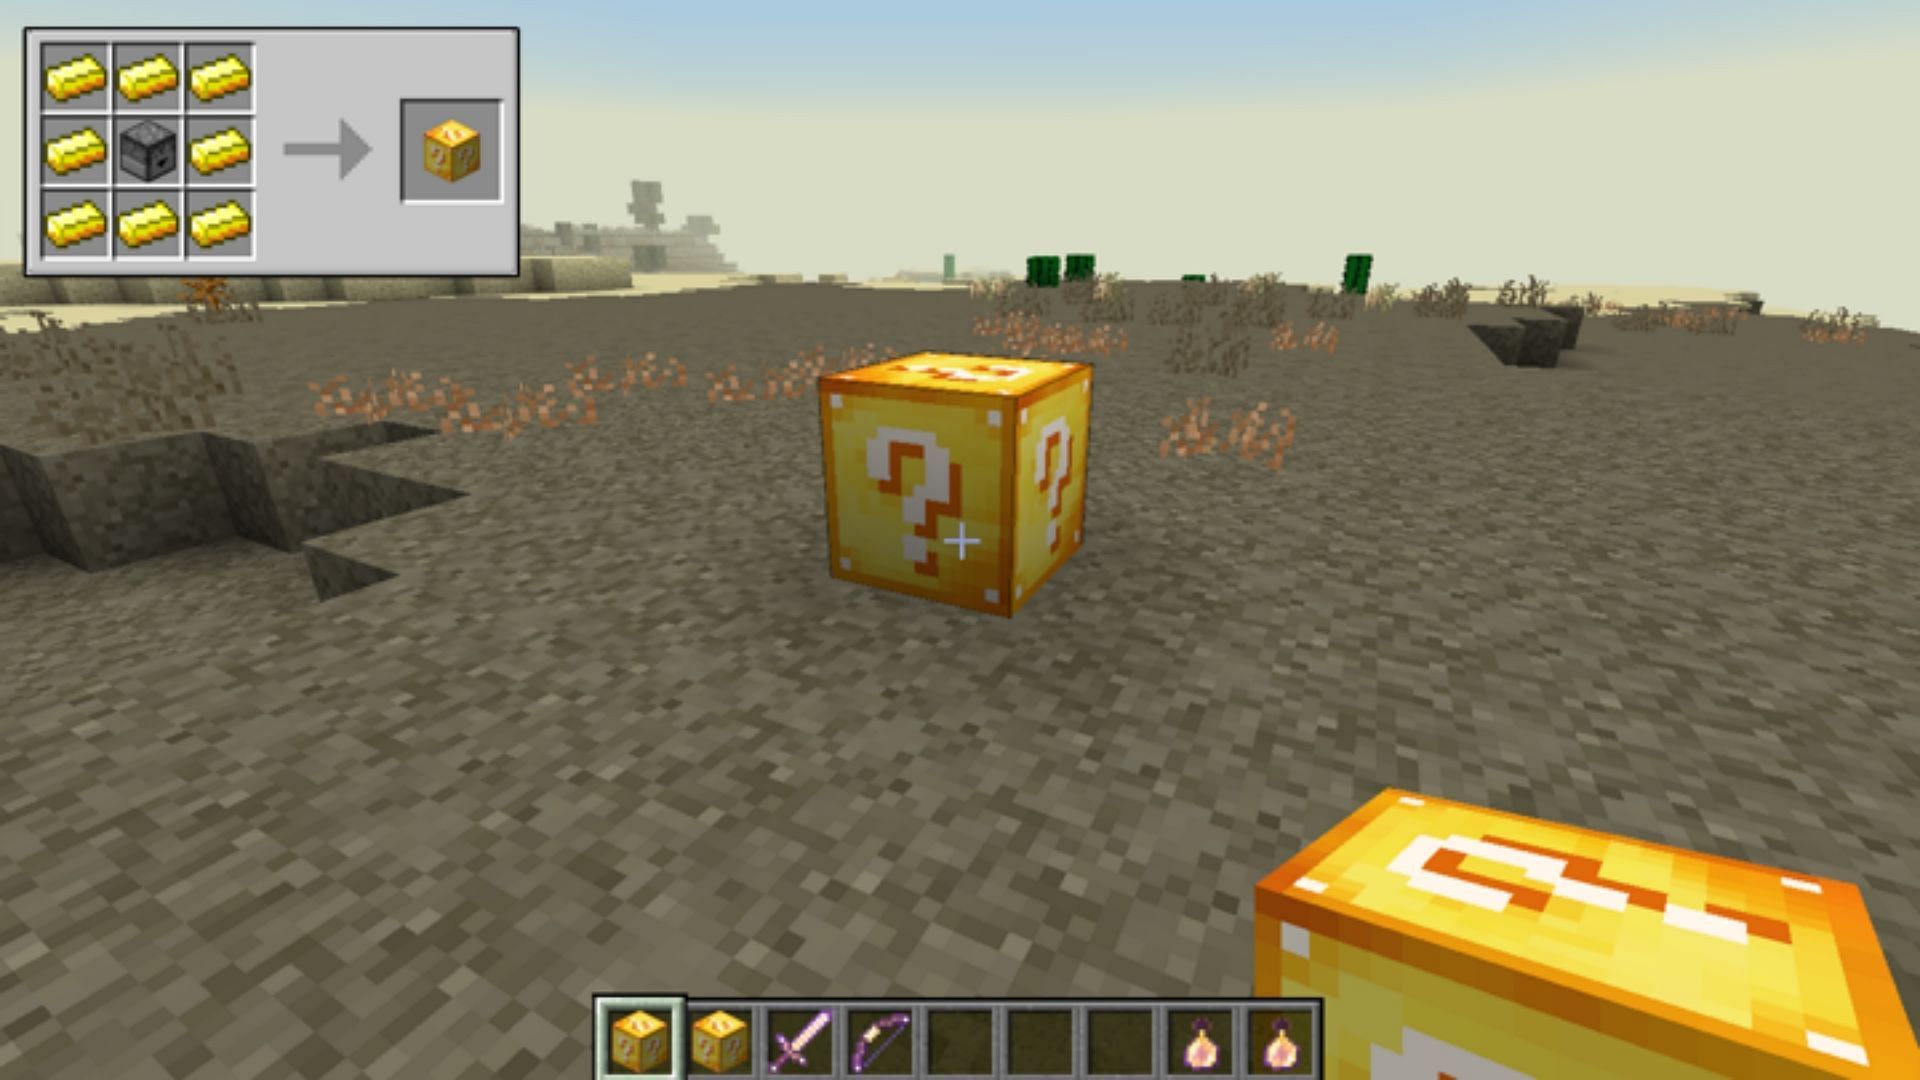 Lucky Block adds a host of new features to the game through various mystery blocks (Image via minecraftmods.com)